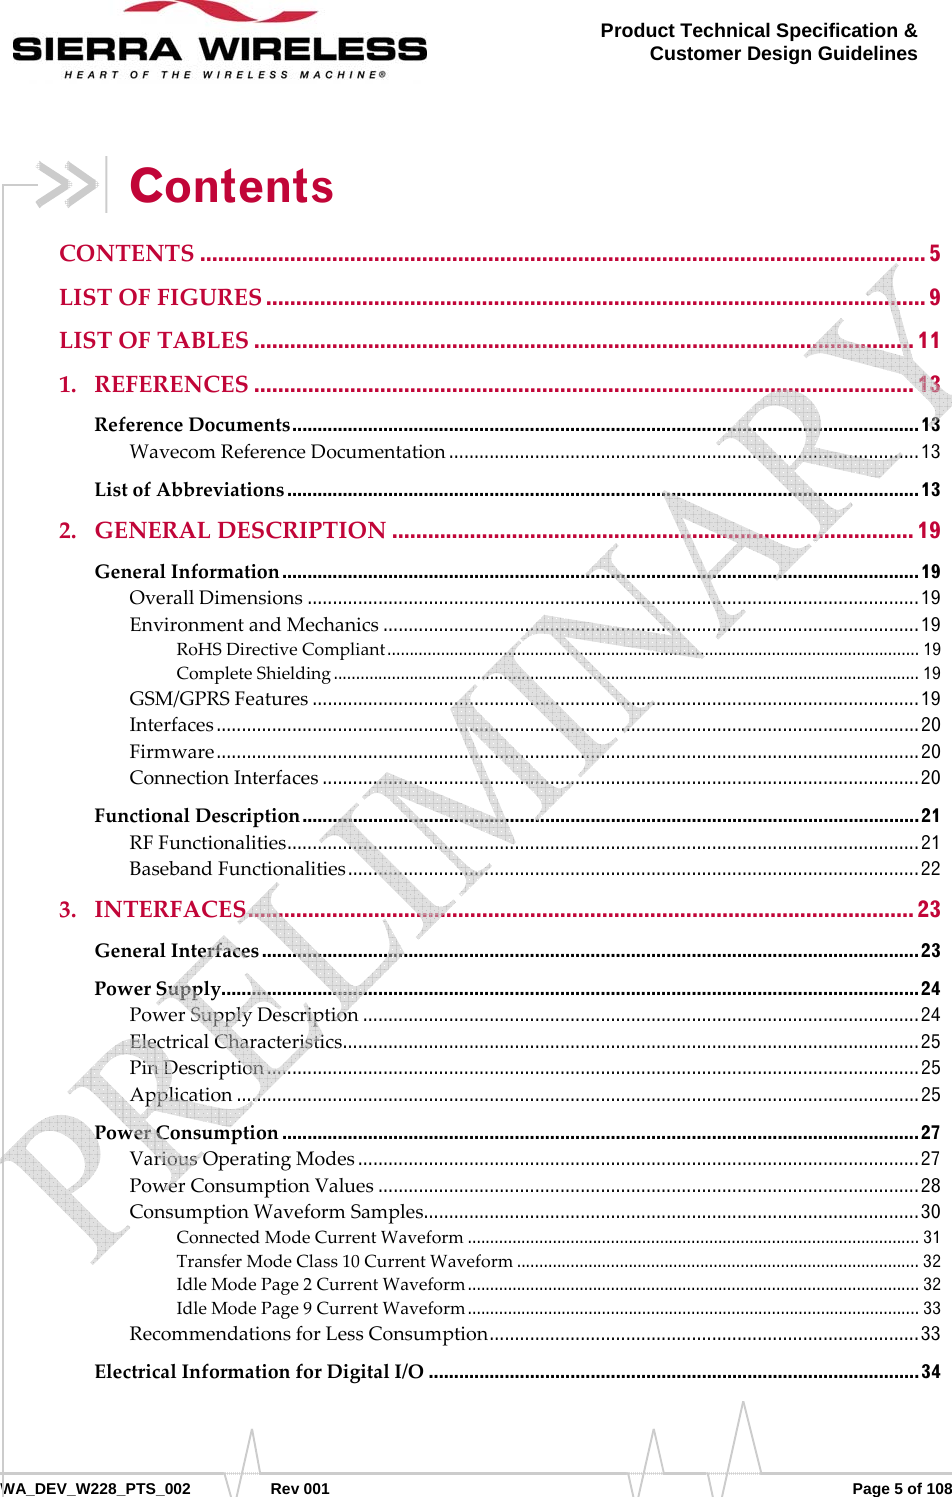      WA_DEV_W228_PTS_002 Rev 001  Page 5 of 108 Product Technical Specification &amp; Customer Design Guidelines Contents CONTENTS ......................................................................................................................... 5 LISTOFFIGURES .............................................................................................................. 9 LISTOFTABLES .............................................................................................................. 11 1. REFERENCES .............................................................................................................. 13 ReferenceDocuments ............................................................................................................................ 13 WavecomReferenceDocumentation ............................................................................................. 13 ListofAbbreviations ............................................................................................................................. 13 2. GENERALDESCRIPTION ....................................................................................... 19 GeneralInformation .............................................................................................................................. 19 OverallDimensions ......................................................................................................................... 19 EnvironmentandMechanics .......................................................................................................... 19 RoHSDirectiveCompliant .......................................................................................................................  19 CompleteShielding ................................................................................................................................... 19 GSM/GPRSFeatures ........................................................................................................................ 19 Interfaces ........................................................................................................................................... 20 Firmware ........................................................................................................................................... 20 ConnectionInterfaces ...................................................................................................................... 20 FunctionalDescription .......................................................................................................................... 21 RFFunctionalities ............ ......... ........ ......... ........... ......... ......... ........... ......... ........ ......... ........... ......... . 21 BasebandFunctionalities ................................................................................................................. 22 3. INTERFACES ............................................................................................................... 23 GeneralInterfaces .................................................................................................................................. 23 PowerSupply .......................................................................................................................................... 24 PowerSupplyDescription .............................................................................................................. 24 ElectricalCharacteristics ............ ...... ....... ......... ...... ....... ....... ........ ....... ....... ...... ....... ........ ....... ....... ... 25 PinDescription ................................................................................................................................. 25 Application ....................................................................................................................................... 25 PowerConsumption .............................................................................................................................. 27 VariousOperatingModes ............................................................................................................... 27 PowerConsumptionValues ........................................................................................................... 28 ConsumptionWaveformSamples ....... .. .. .. ... .. .... .. ... .. .. .. .. ... .. .. .. .. ..... .. .. .. .. ... .. .. .. .. ... .. .... .. ... .. .. .. .. ... .. . 30 ConnectedModeCurrentWaveform ..................................................................................................... 31 TransferModeClass10CurrentWaveform .......................................................................................... 32 IdleModePage2CurrentWaveform .....................................................................................................  32 IdleModePage9CurrentWaveform .....................................................................................................  33 RecommendationsforLessConsumption ..................................................................................... 33 ElectricalInformationforDigitalI/O ................................................................................................. 34    